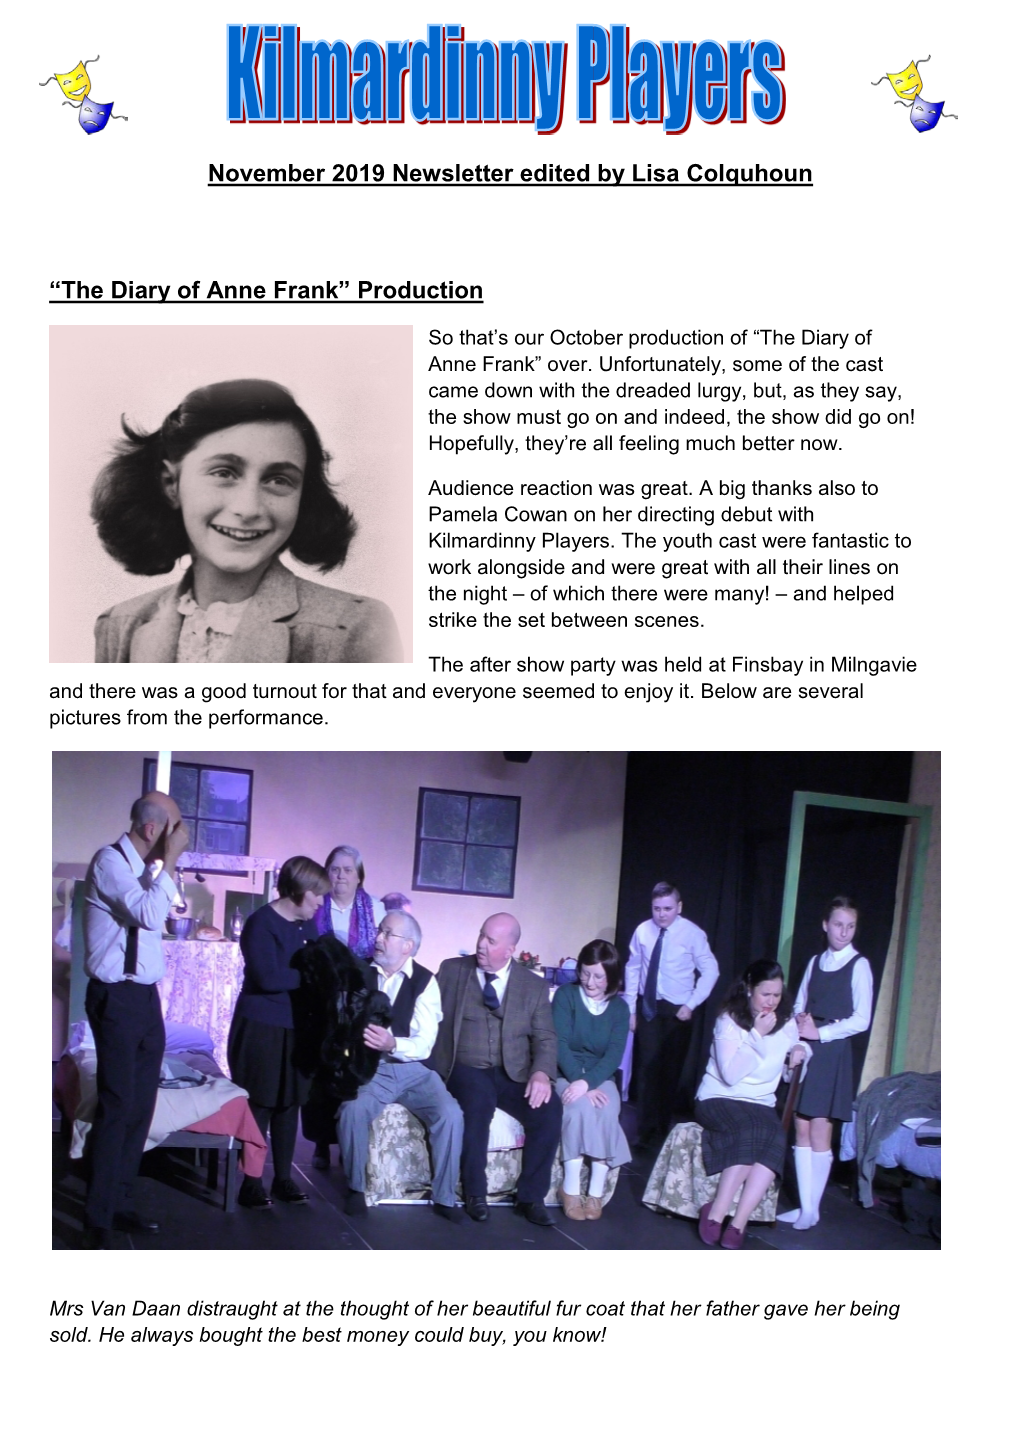 November 2019 Newsletter Edited by Lisa Colquhoun “The Diary of Anne